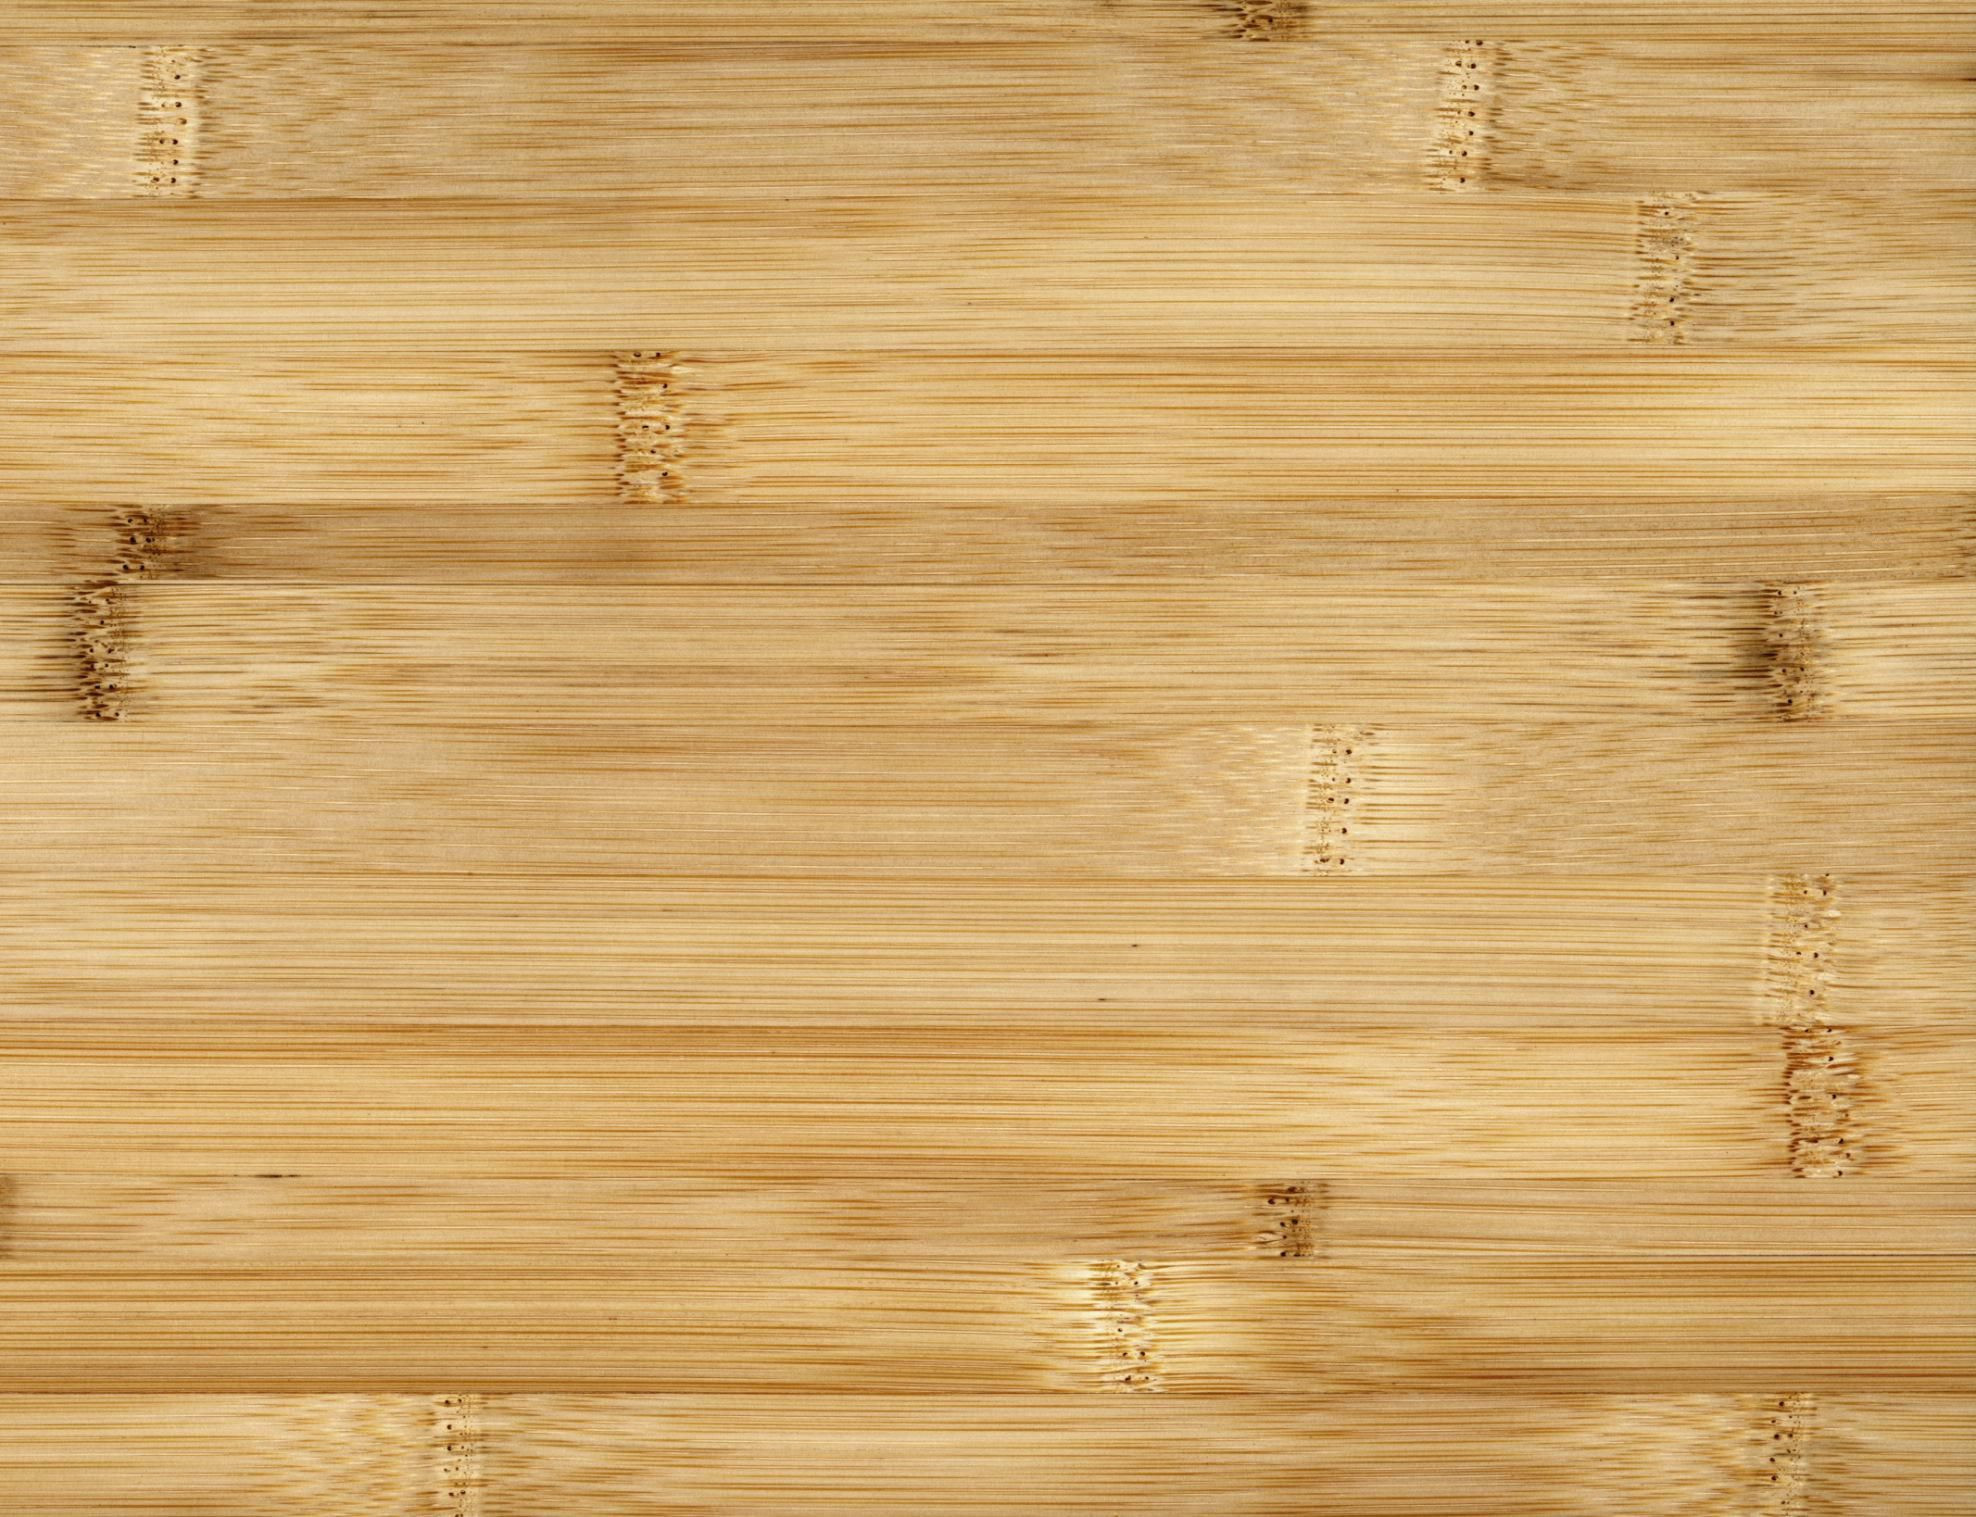 15 Fashionable Reward Hardwood Flooring Prices 2024 free download reward hardwood flooring prices of how to clean bamboo flooring for 200266305 001 56a2fd815f9b58b7d0d000cd